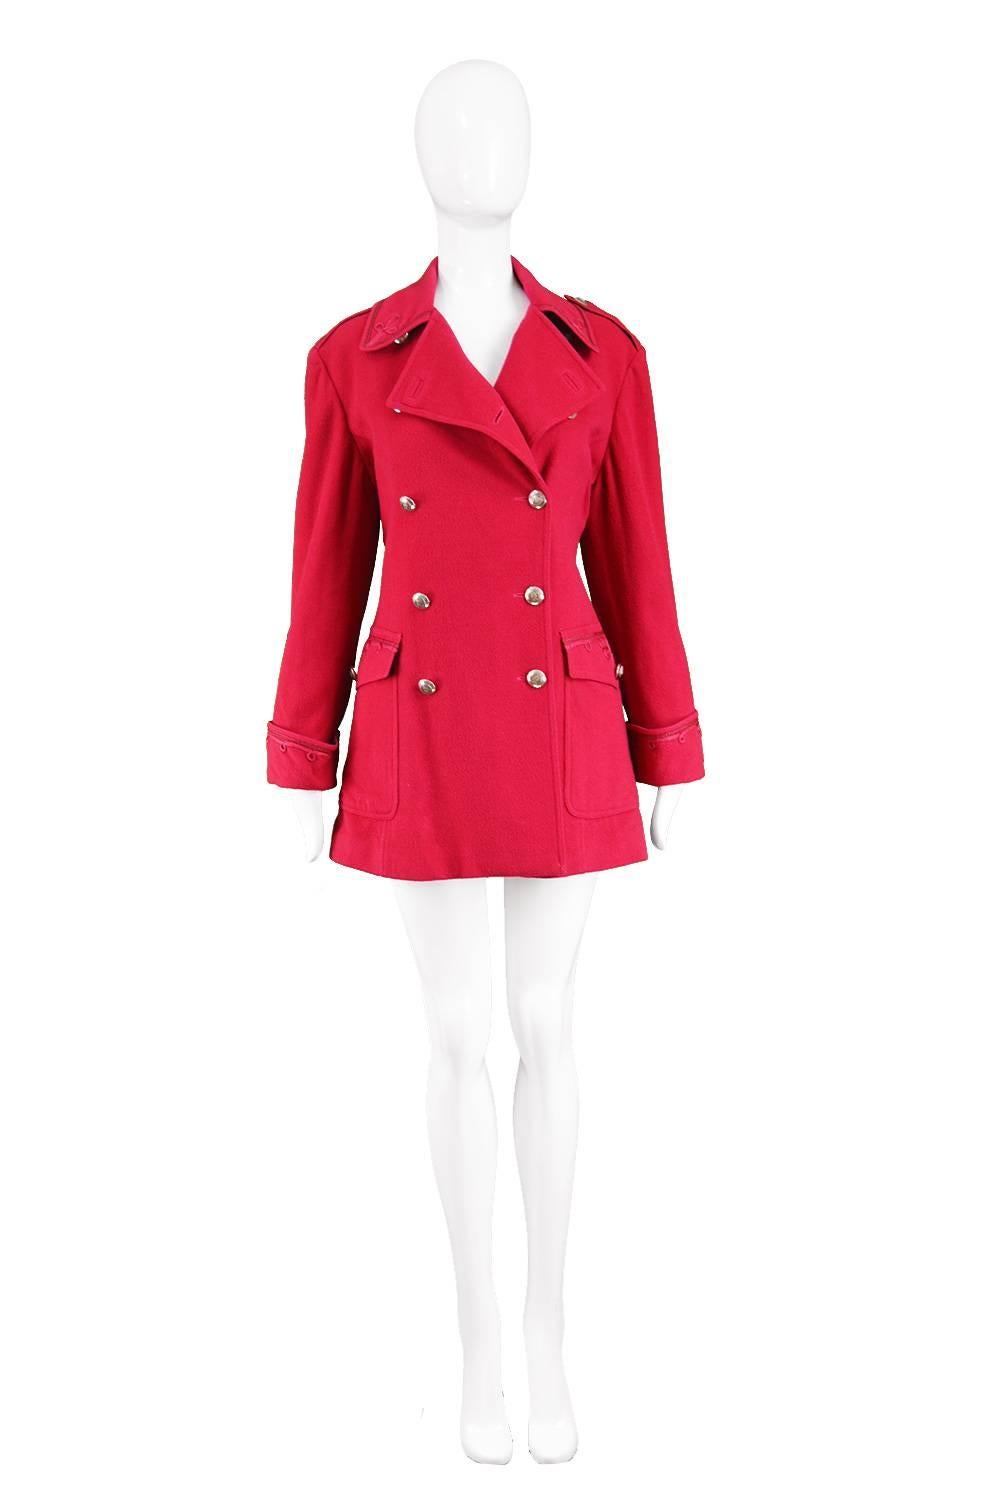 Krizia Vintage Red Italian Wool & Cashmere Military Style Pea Coat, 1990s 

Estimated Size: UK 12/ US 8/ EU 40. Please check measurements. 
Bust - 38” / 96cm (please allow a couple of inches room for movement)
Waist - 35” / 89cm
Hips - 40” /